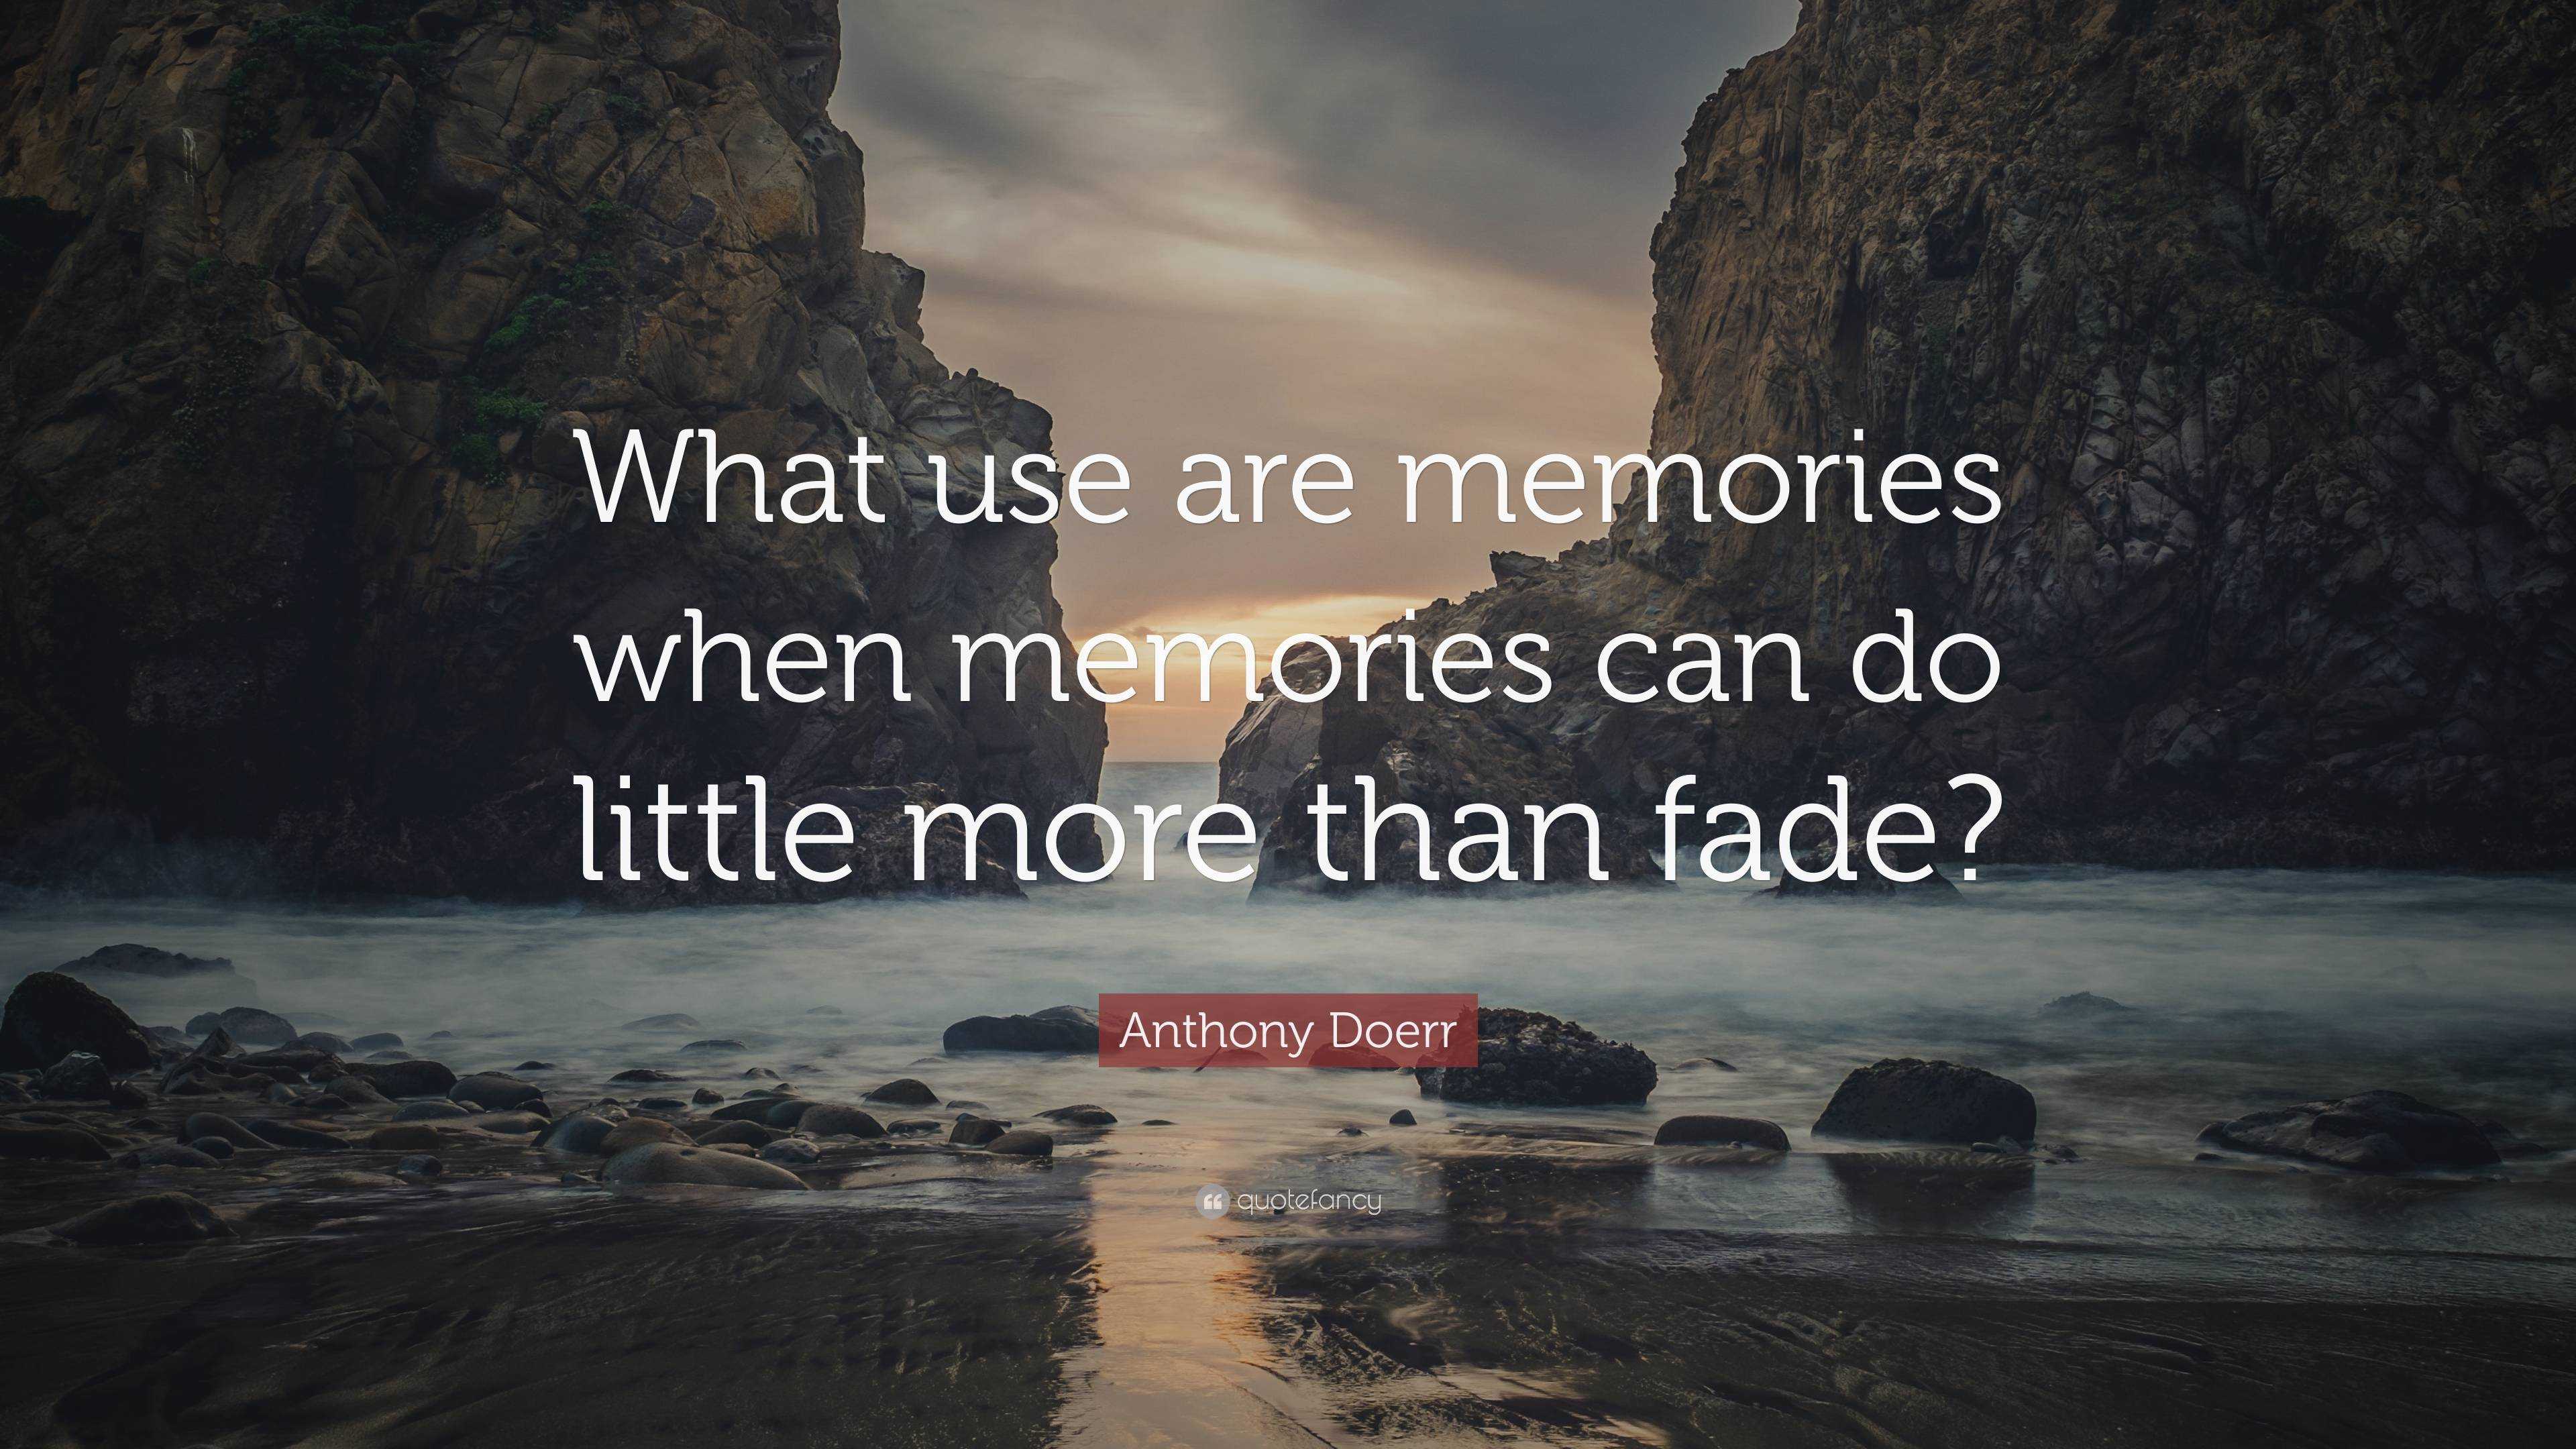 Anthony Doerr Quote: “What use are memories when memories can do little ...